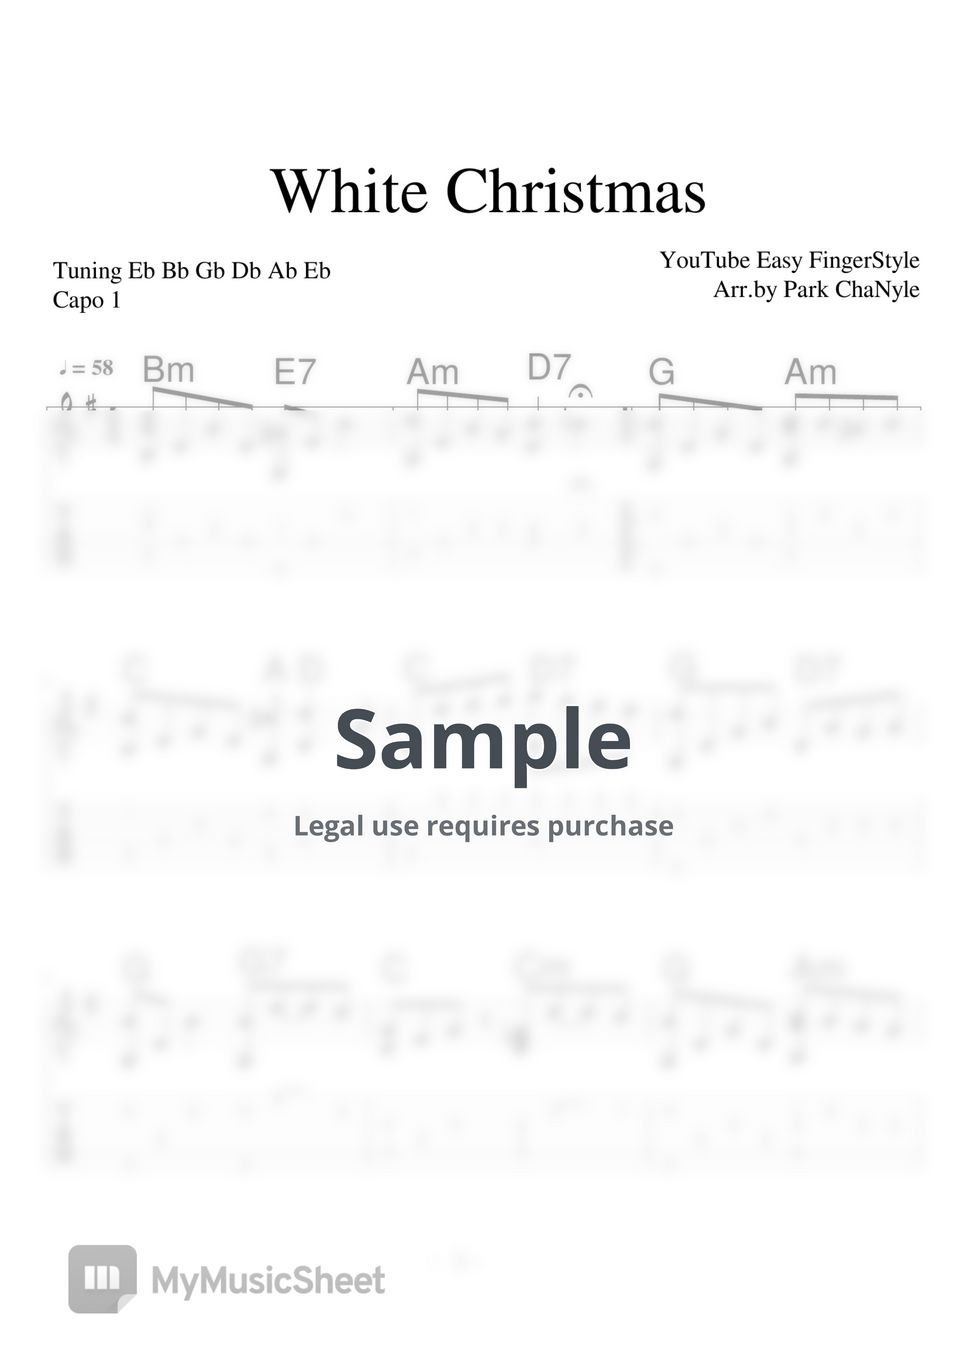 Irving Berlin - White Christmas (Christmas Songs) by Easy FingerStyle